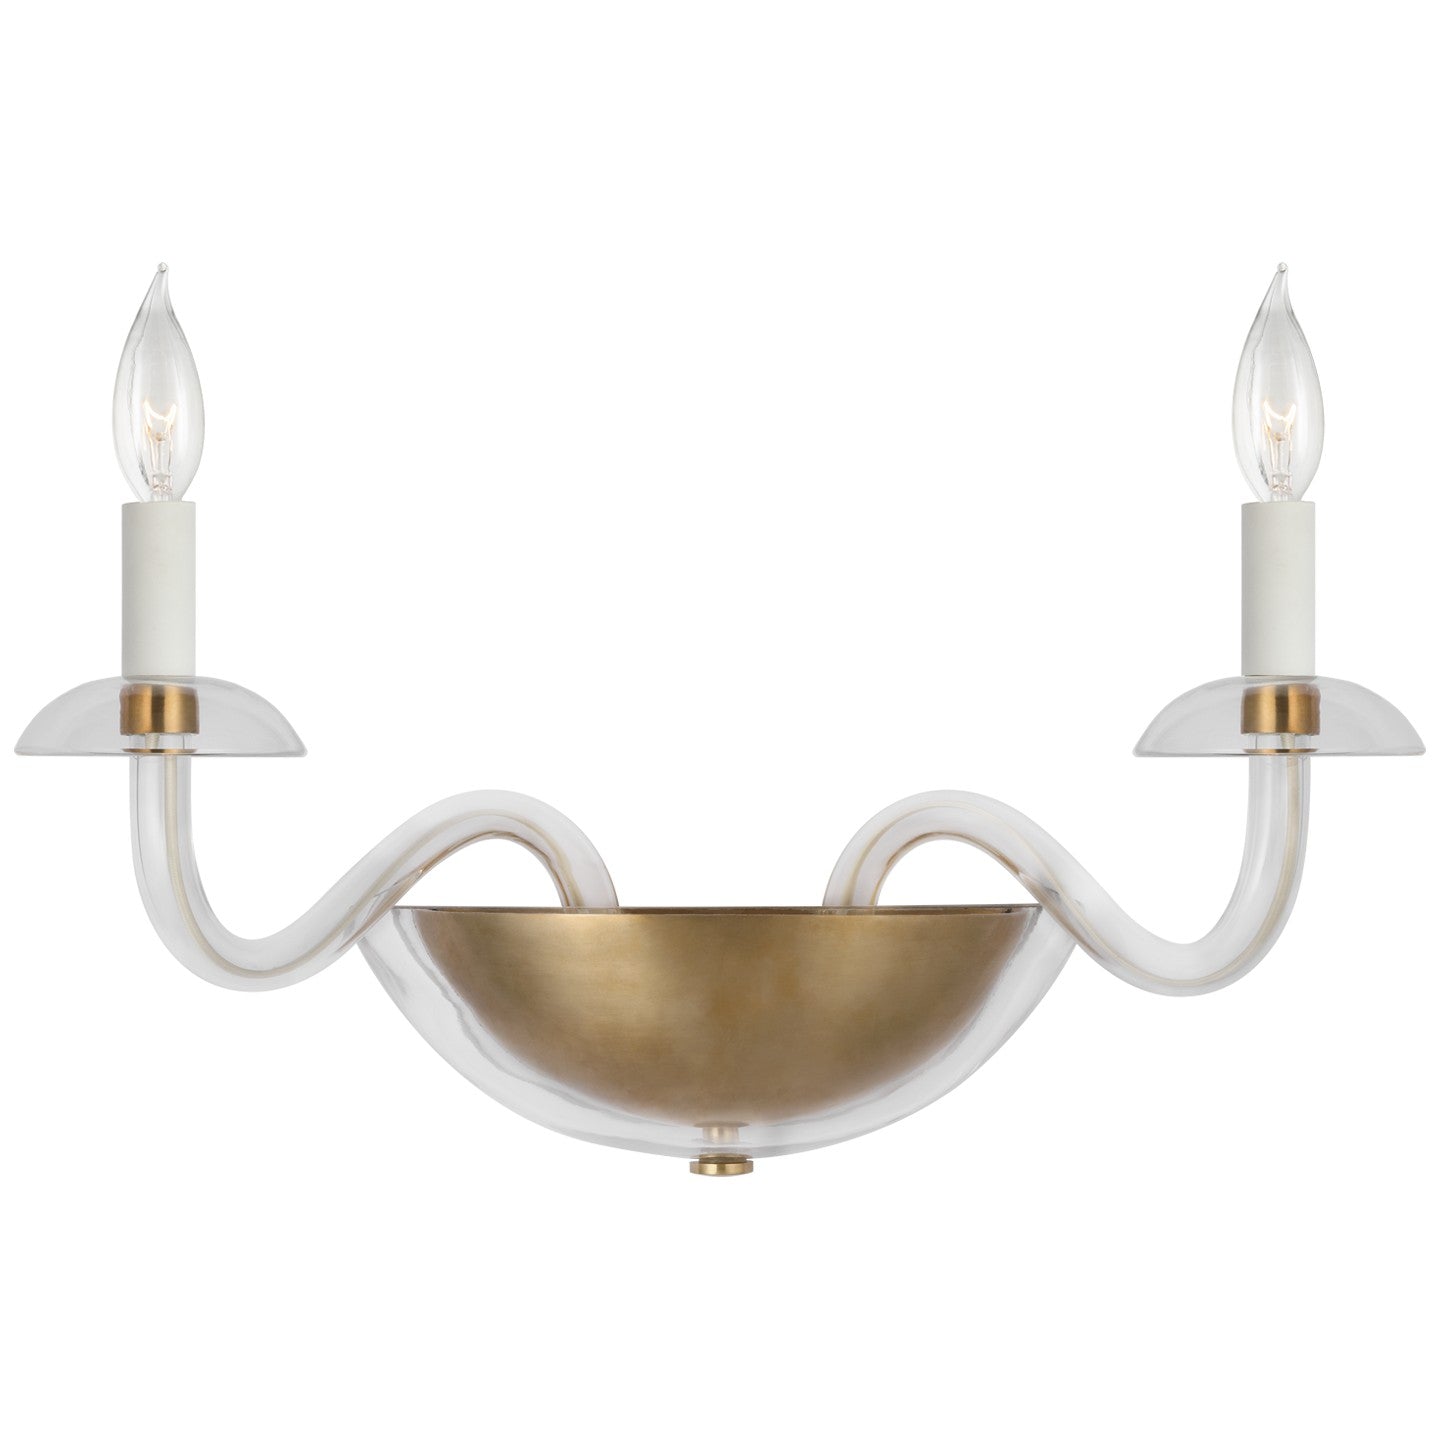 Visual Comfort Signature - PCD 2020CG/HAB - LED Wall Sconce - Brigitte - Clear Glass and Hand-Rubbed Antique Brass